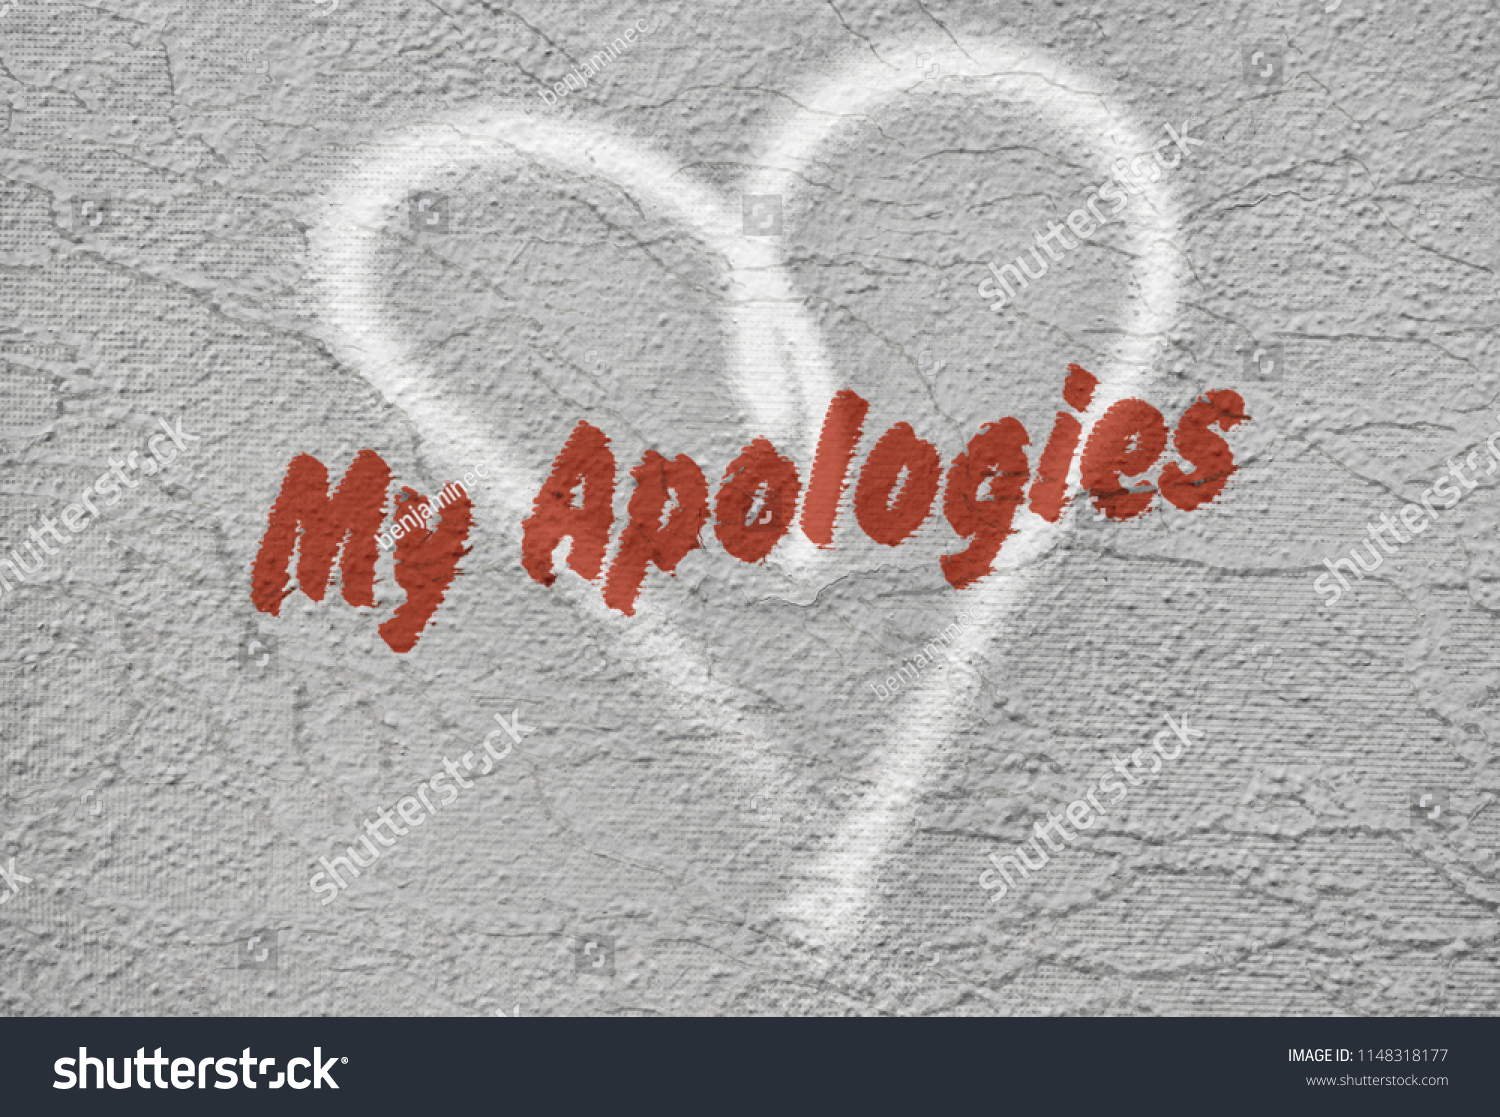 Text My Apologies written in red over a hand drawn heart #1148318177